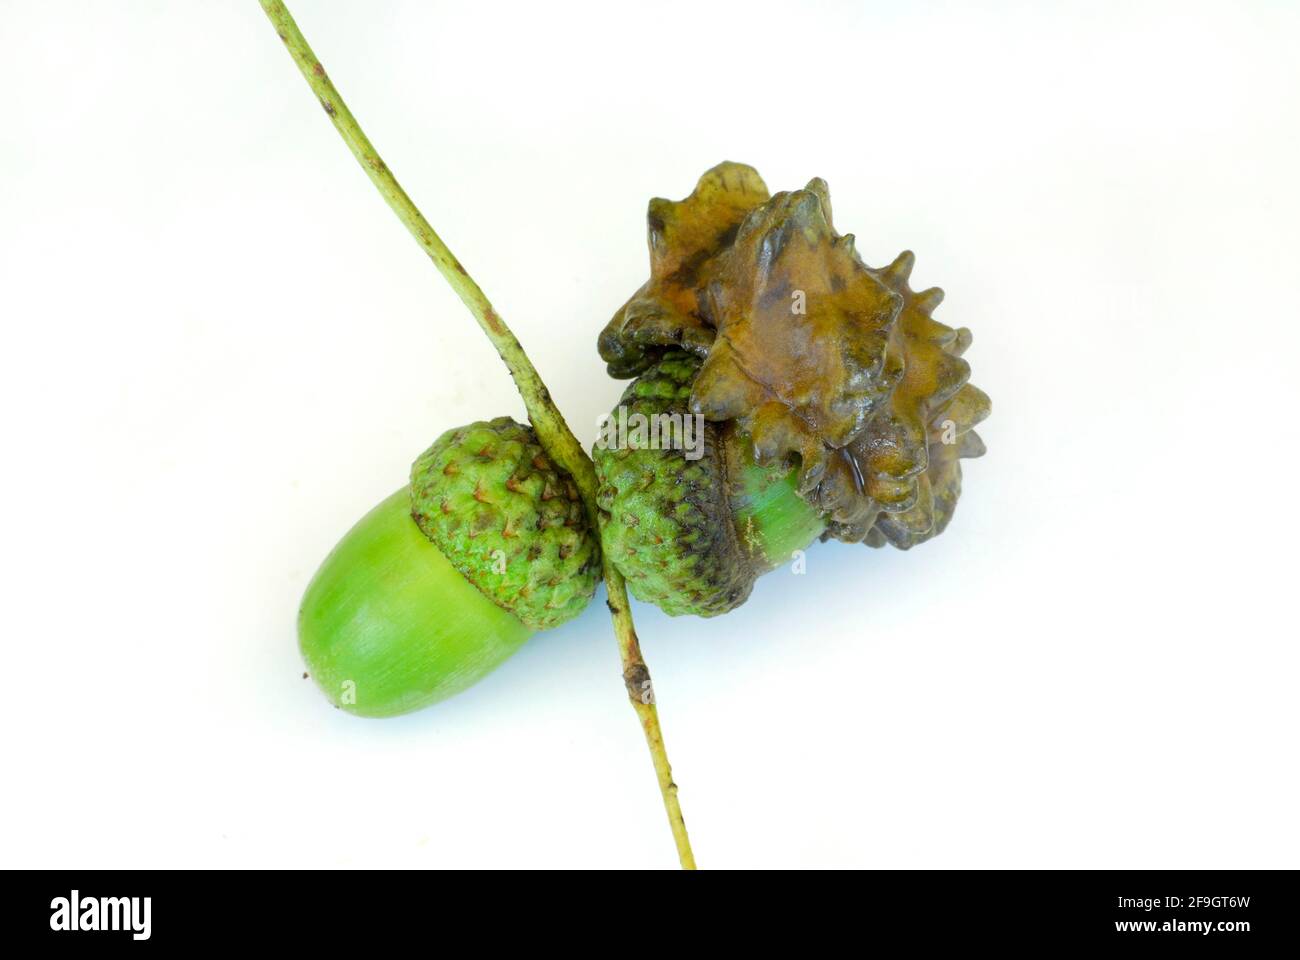 Oak gall from gall wasp to acorn, oak gall wasp, plant pest, gall wasp, plant diseases Stock Photo